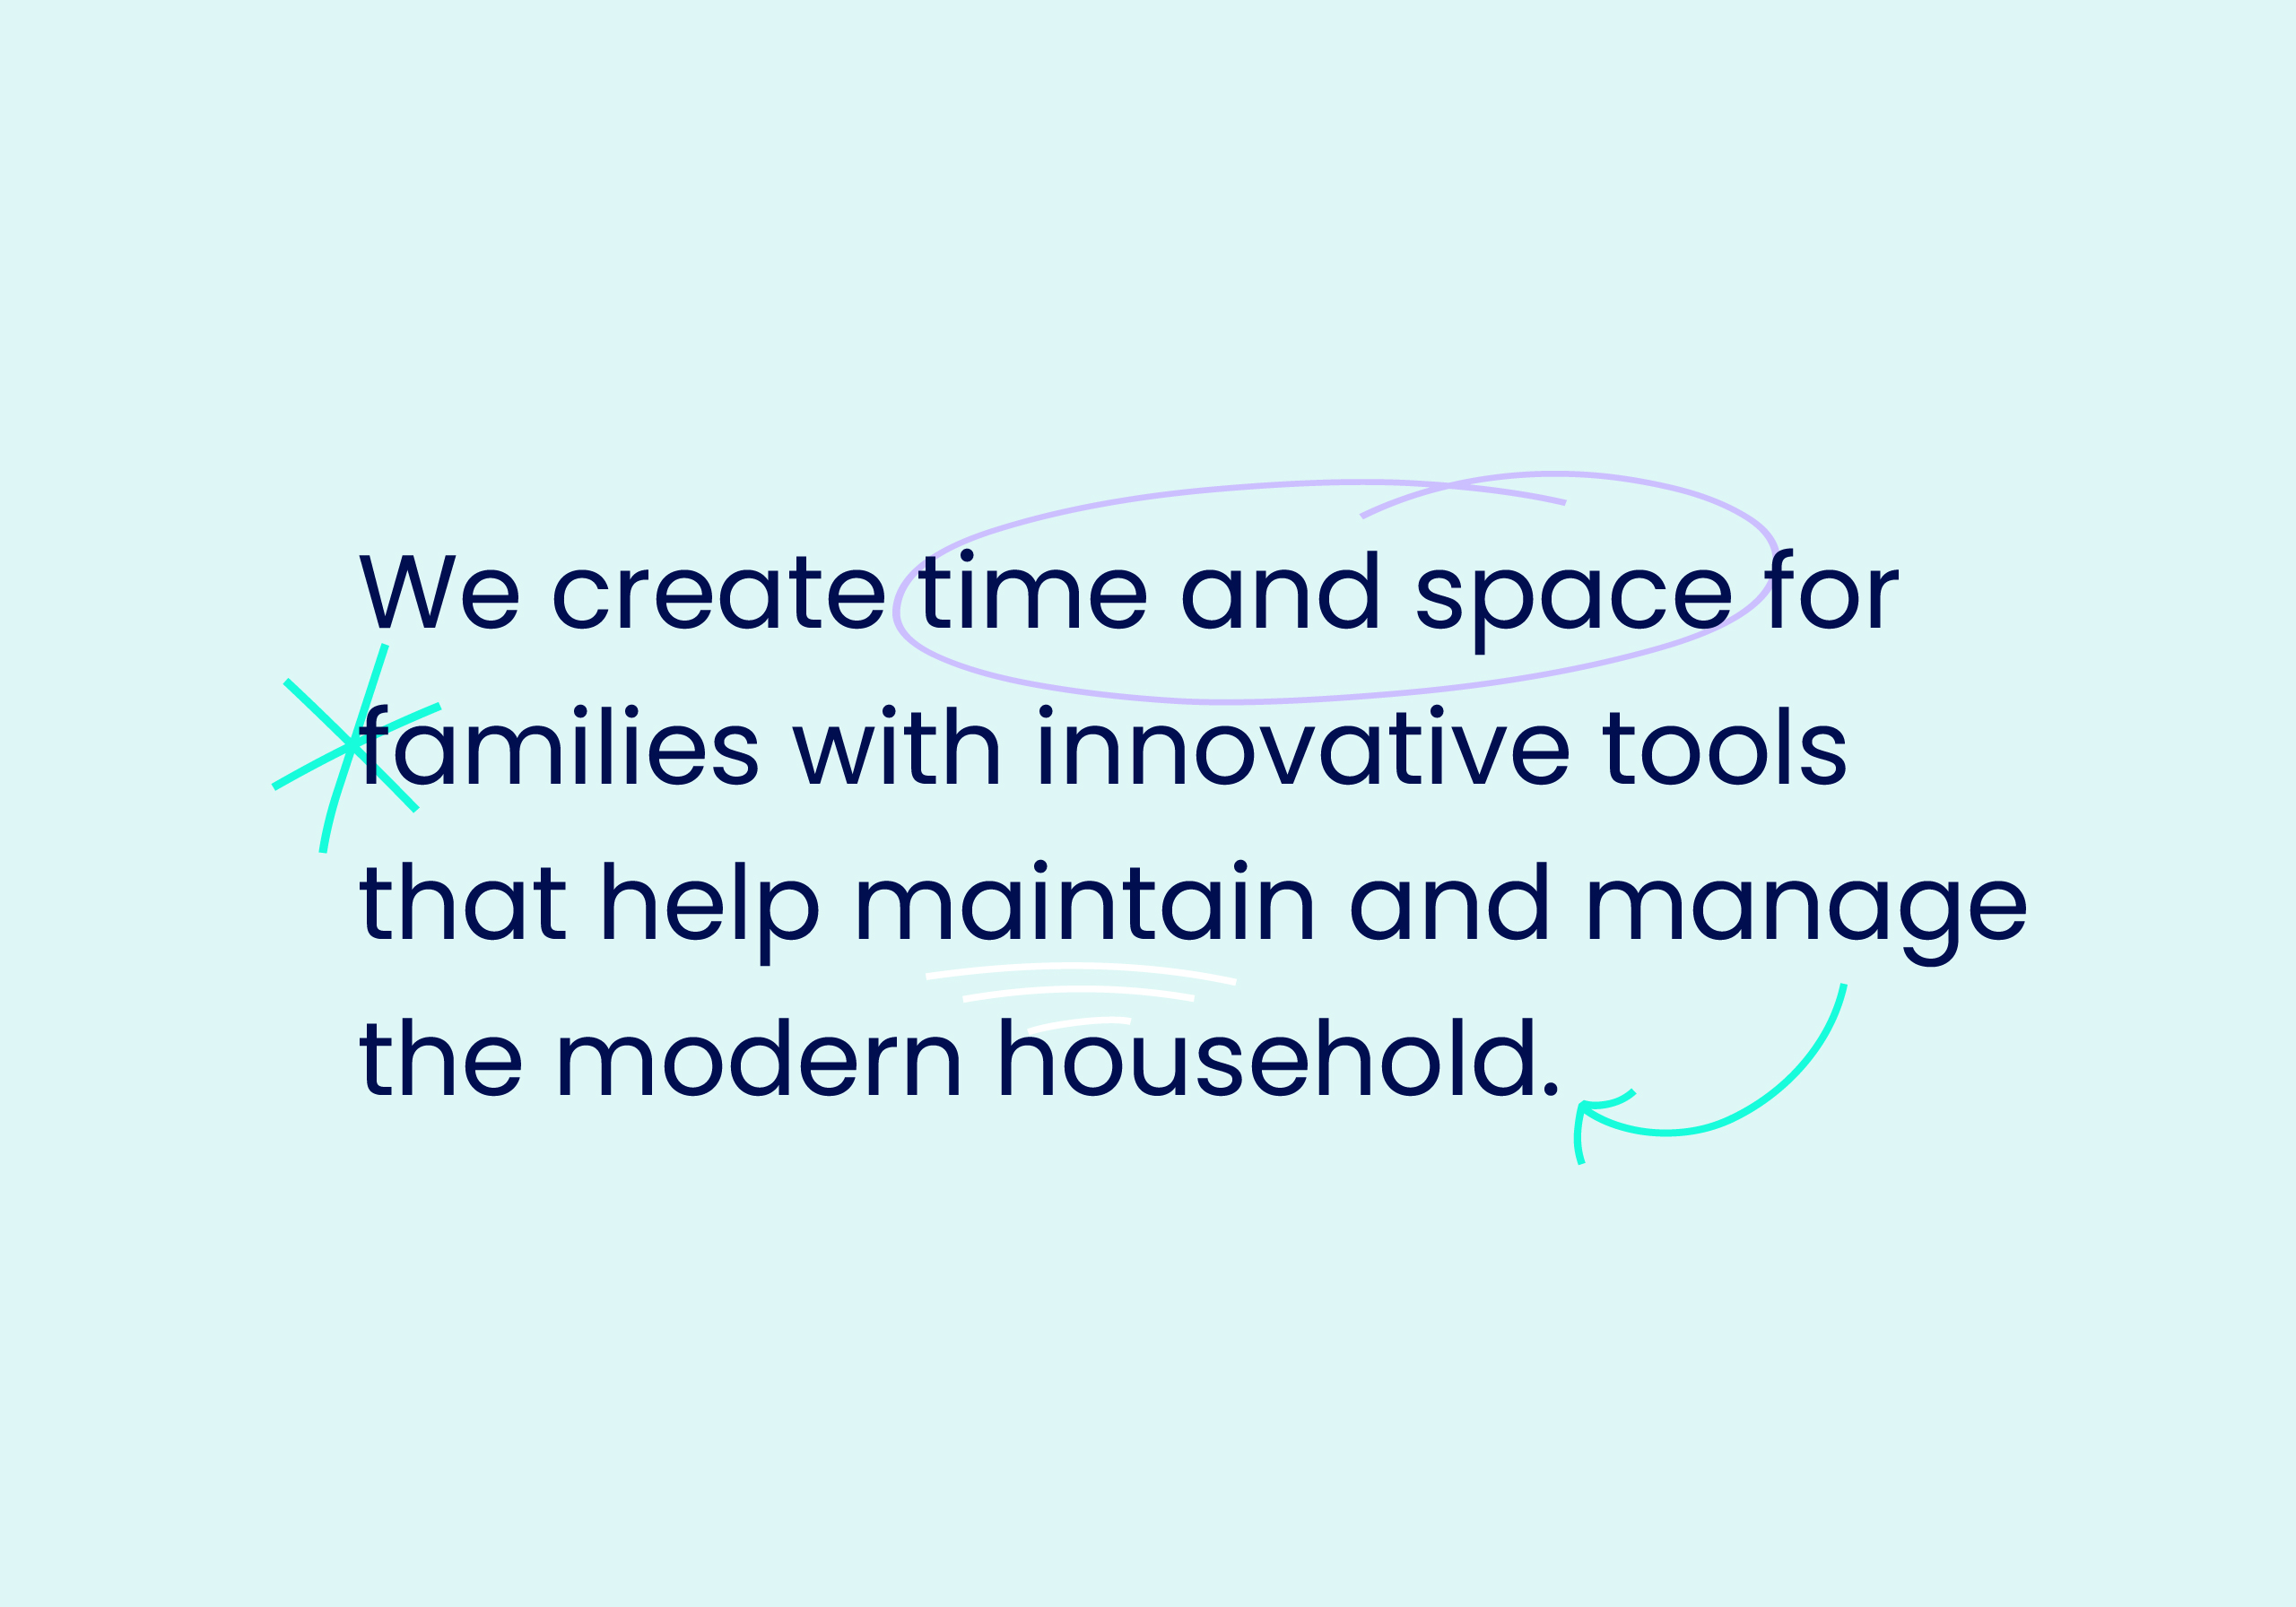 eeva: We create time and space for families with innovative tools that help maintain and mange the modern household.